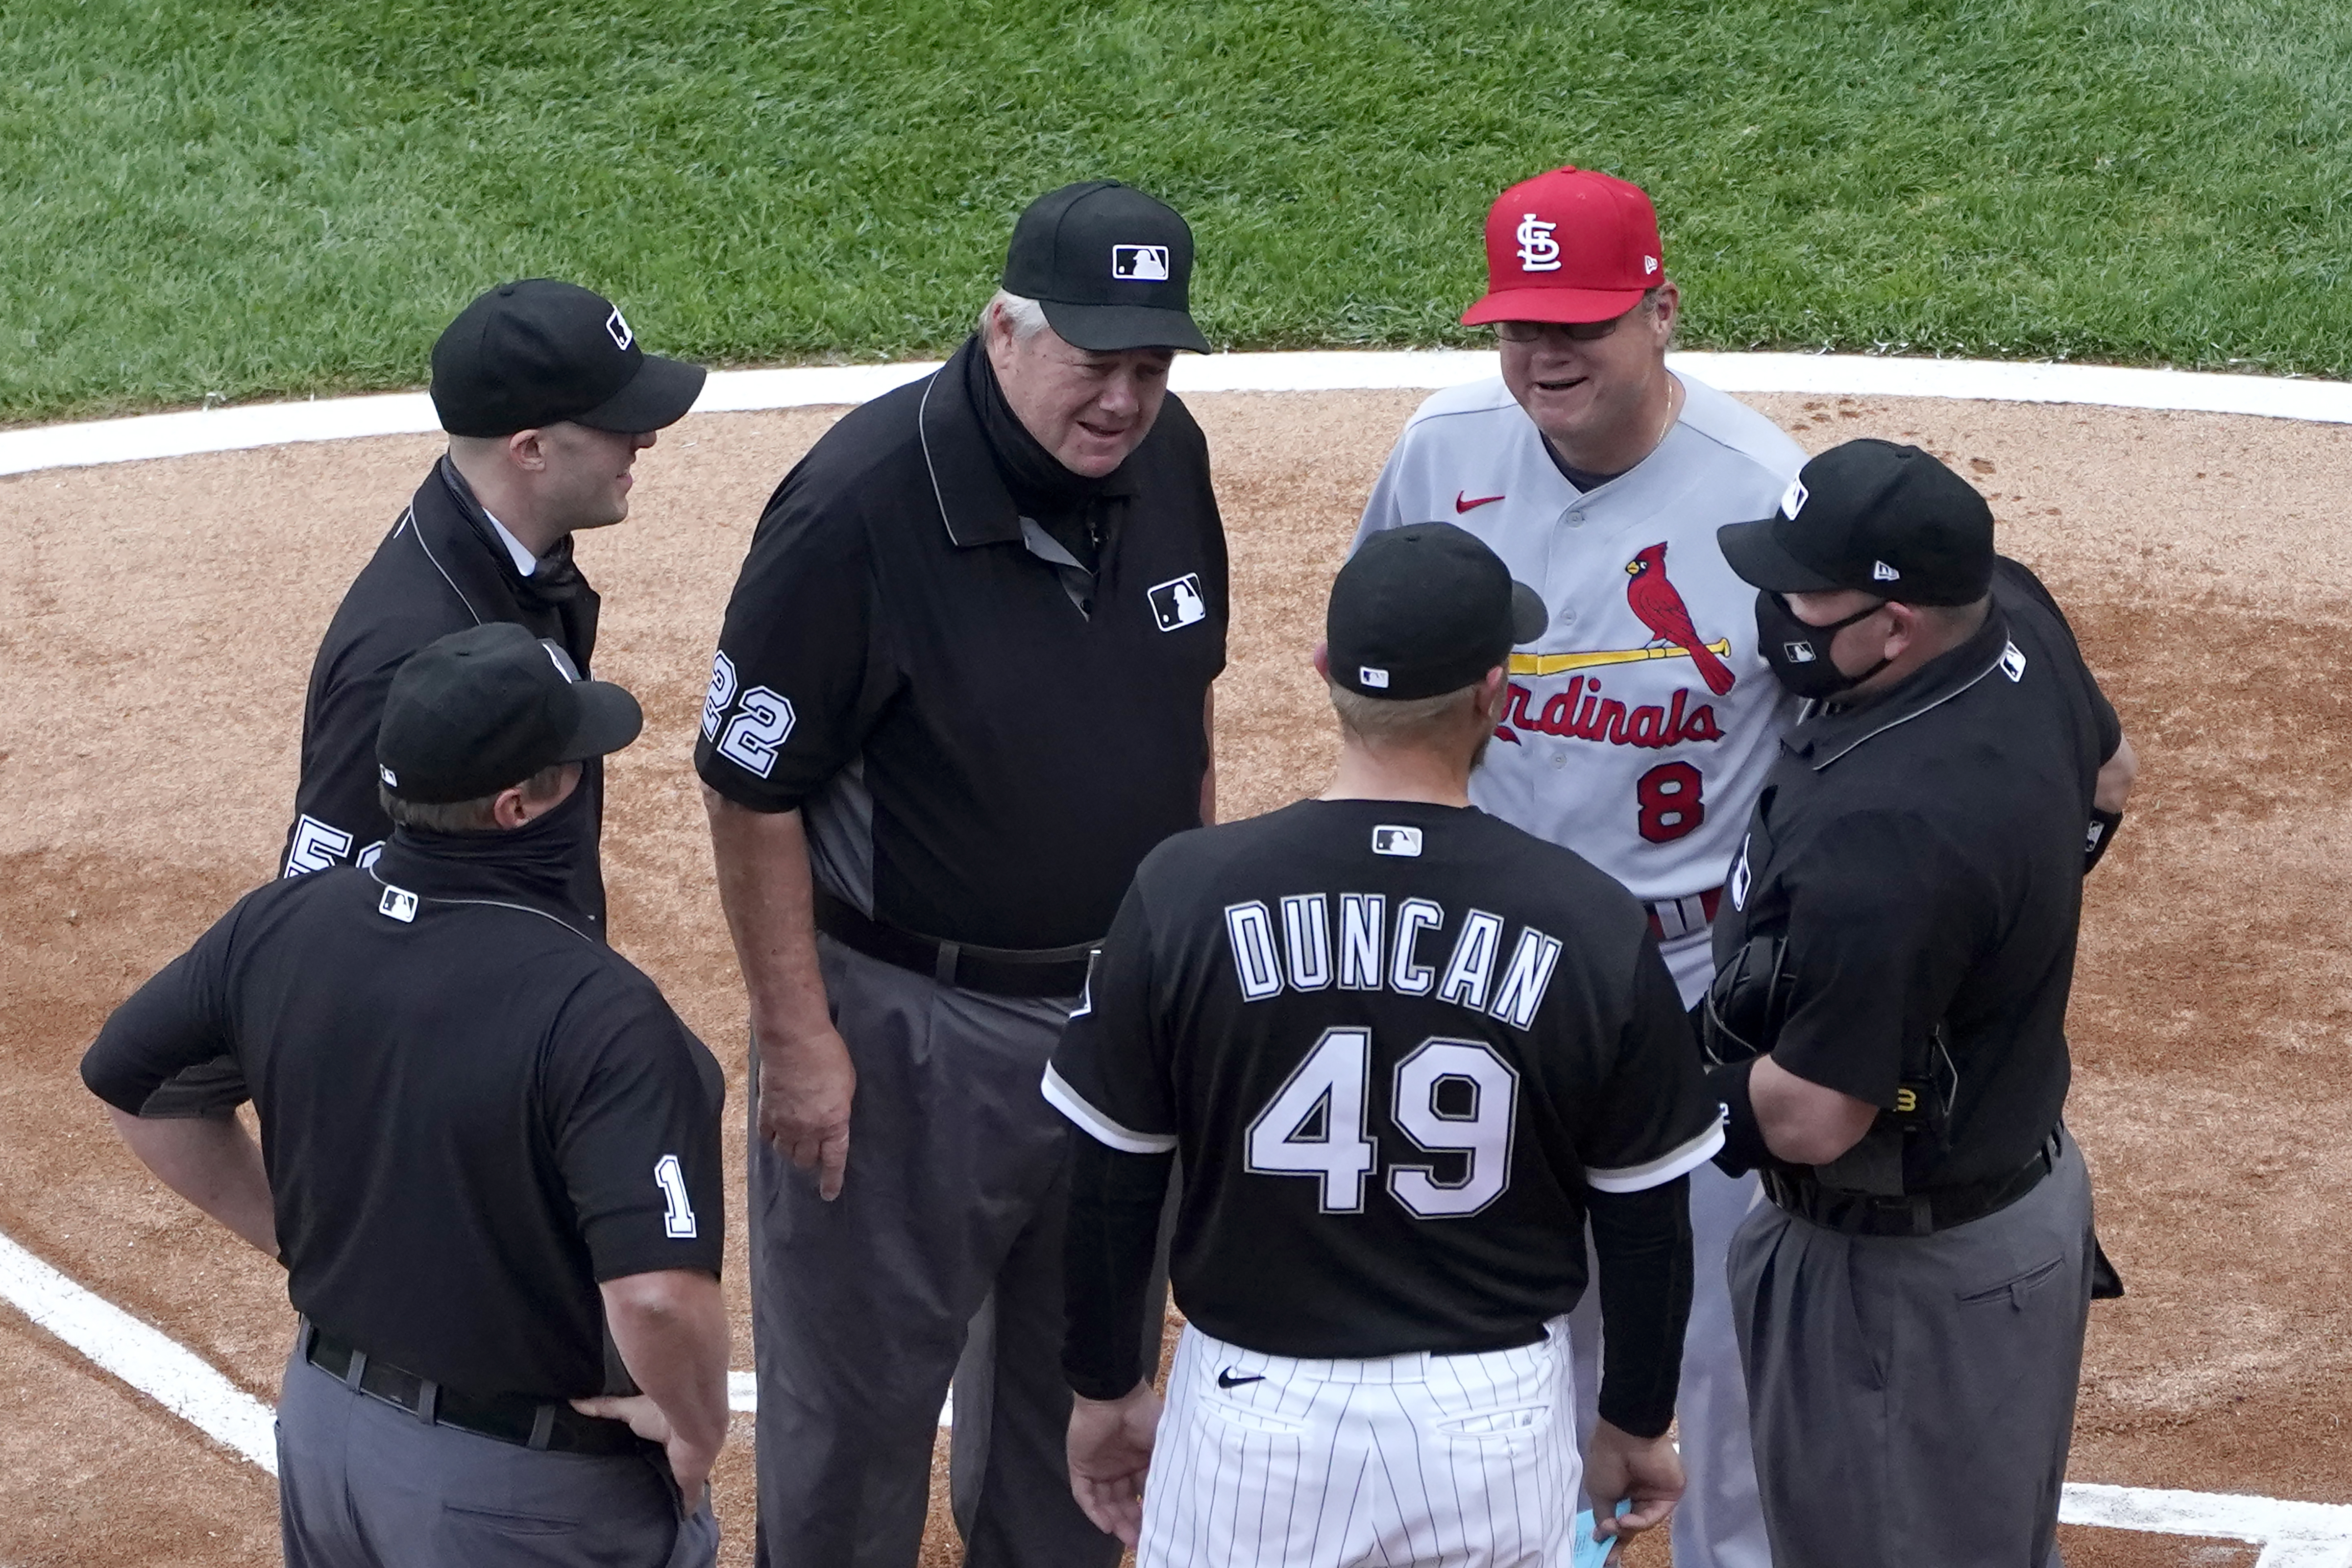 Chicago White Sox Manger Tony La Russa has words with the umpires